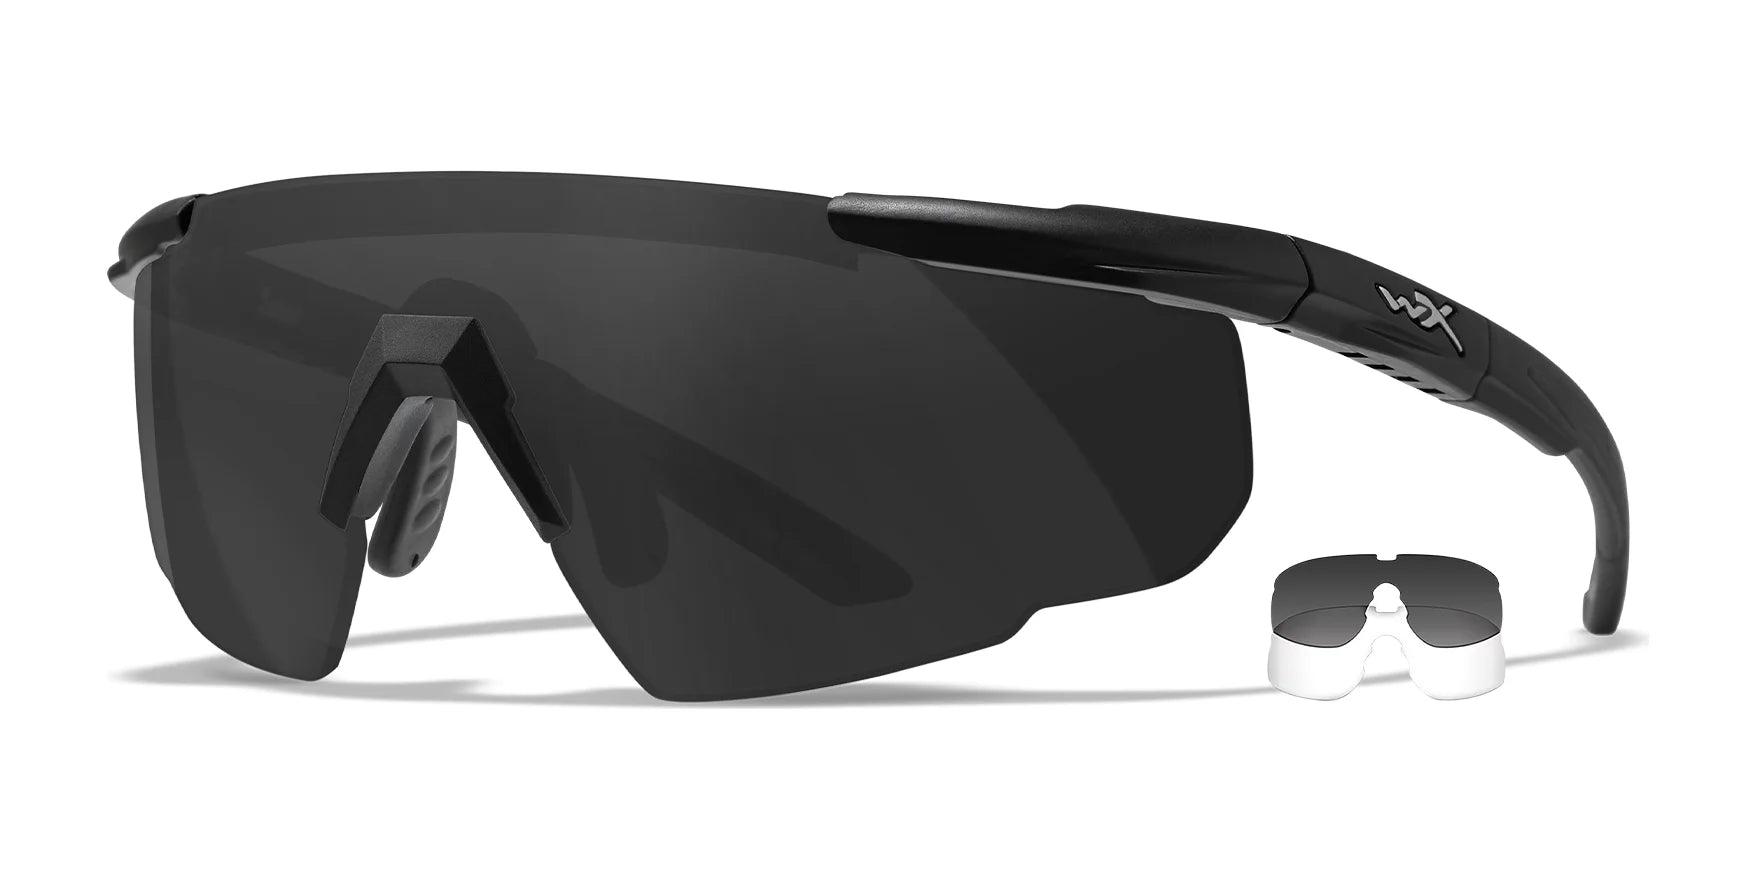 Wiley X SABER Safety Glasses Black / Clear, Smoke Grey